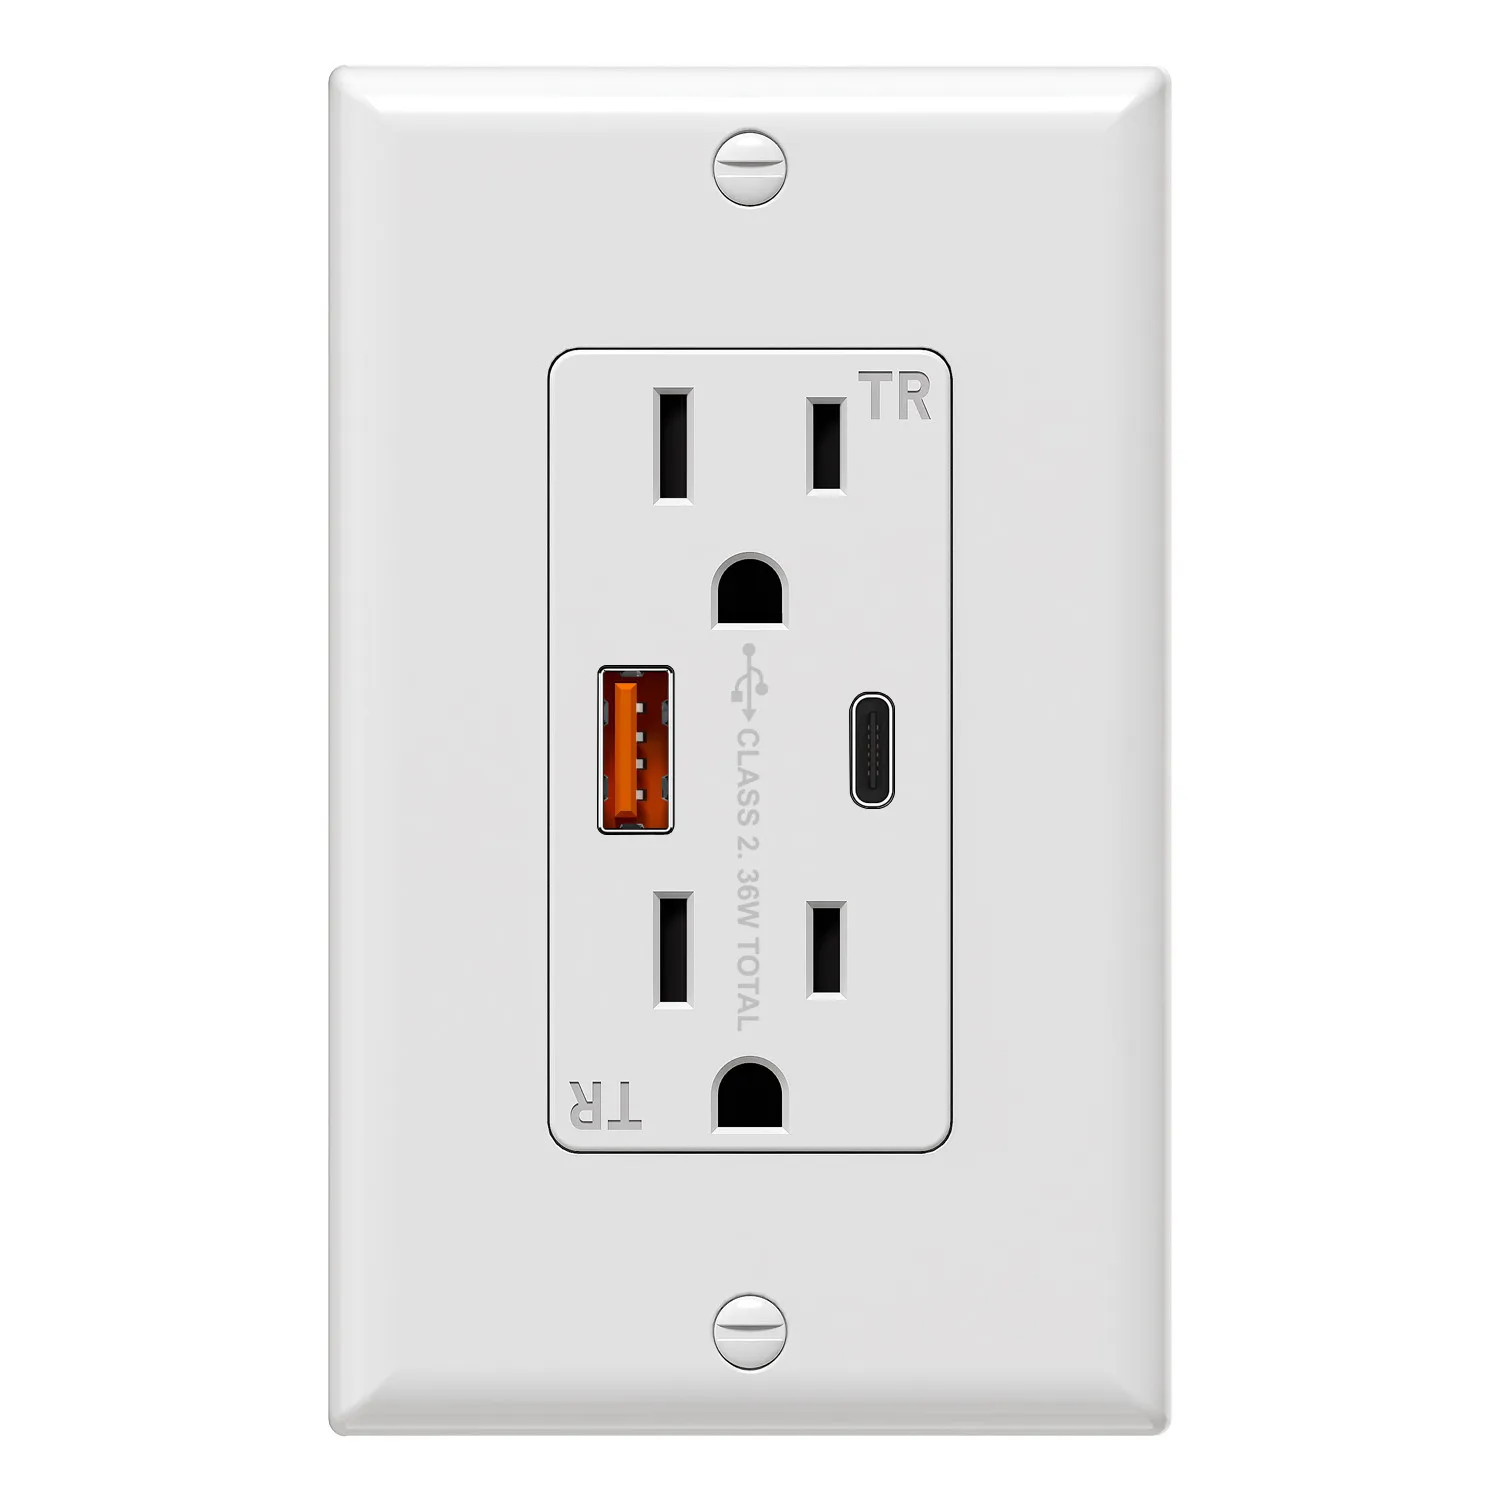 Outlet with USB Charger 3.1A socket Dual Duplex Receptacle 15-Amp w/ wall plate 